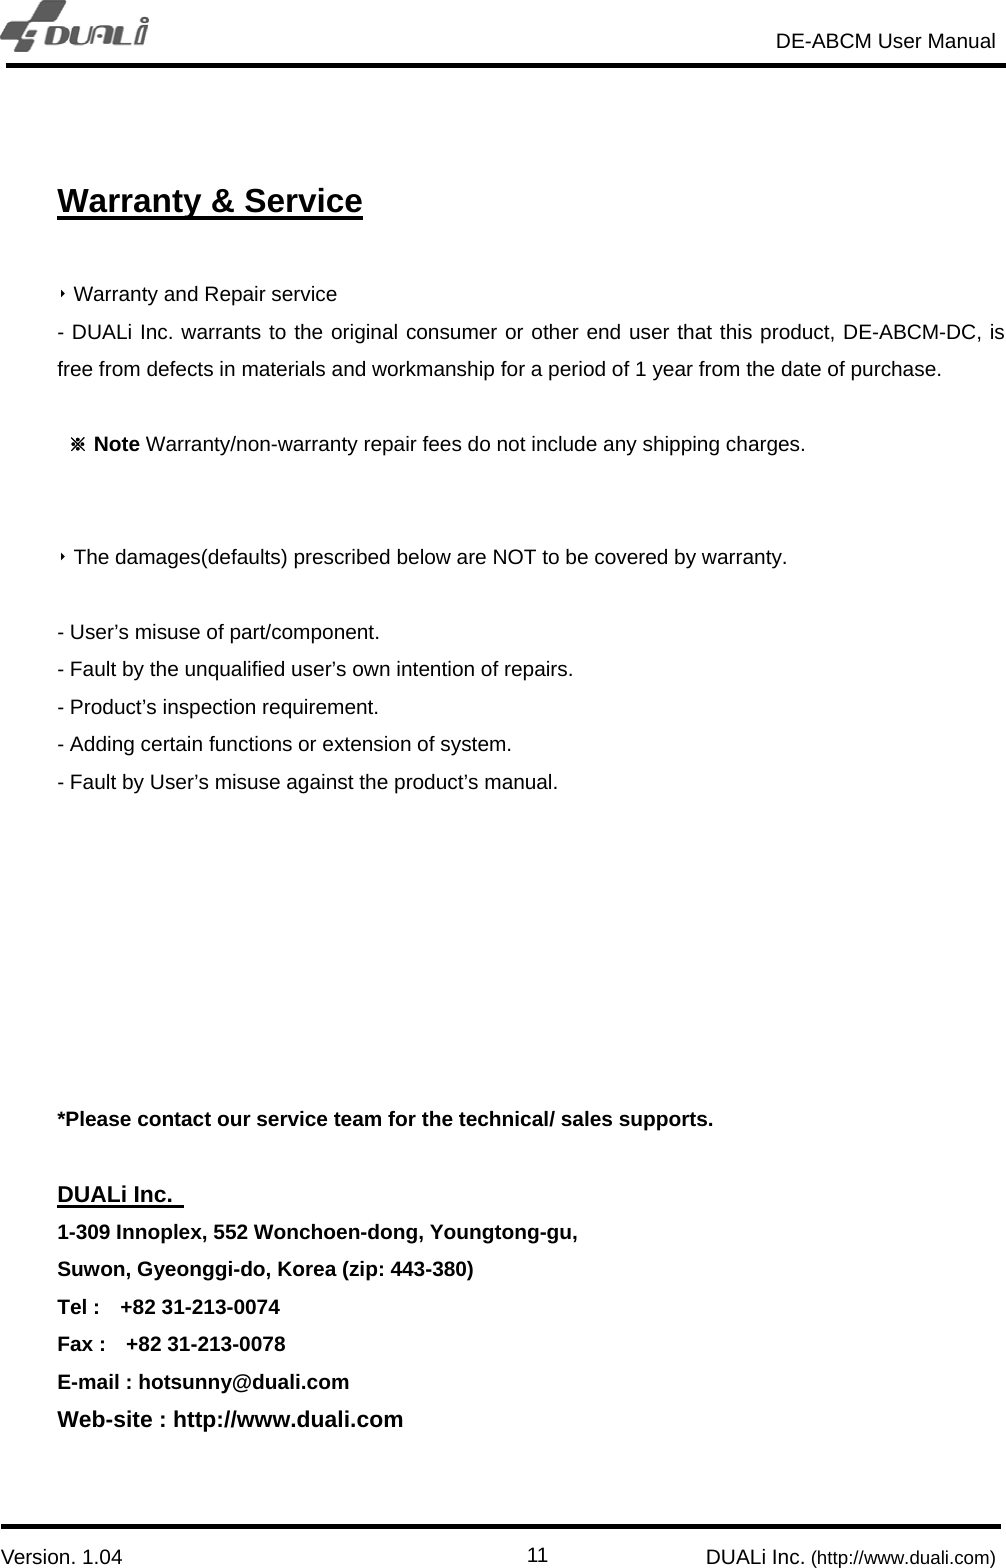                                                                       DE-ABCM User Manual                            Version. 1.04                                                        DUALi Inc. (http://www.duali.com)  11 Warranty &amp; Service  ‣ Warranty and Repair service - DUALi Inc. warrants to the original consumer or other end user that this product, DE-ABCM-DC, is free from defects in materials and workmanship for a period of 1 year from the date of purchase.  ※ Note Warranty/non-warranty repair fees do not include any shipping charges.   ‣ The damages(defaults) prescribed below are NOT to be covered by warranty.  - User’s misuse of part/component. - Fault by the unqualified user’s own intention of repairs.   - Product’s inspection requirement. - Adding certain functions or extension of system. - Fault by User’s misuse against the product’s manual.         *Please contact our service team for the technical/ sales supports.  DUALi Inc.   1-309 Innoplex, 552 Wonchoen-dong, Youngtong-gu, Suwon, Gyeonggi-do, Korea (zip: 443-380) Tel :  +82 31-213-0074 Fax :  +82 31-213-0078 E-mail : hotsunny@duali.com Web-site : http://www.duali.com   